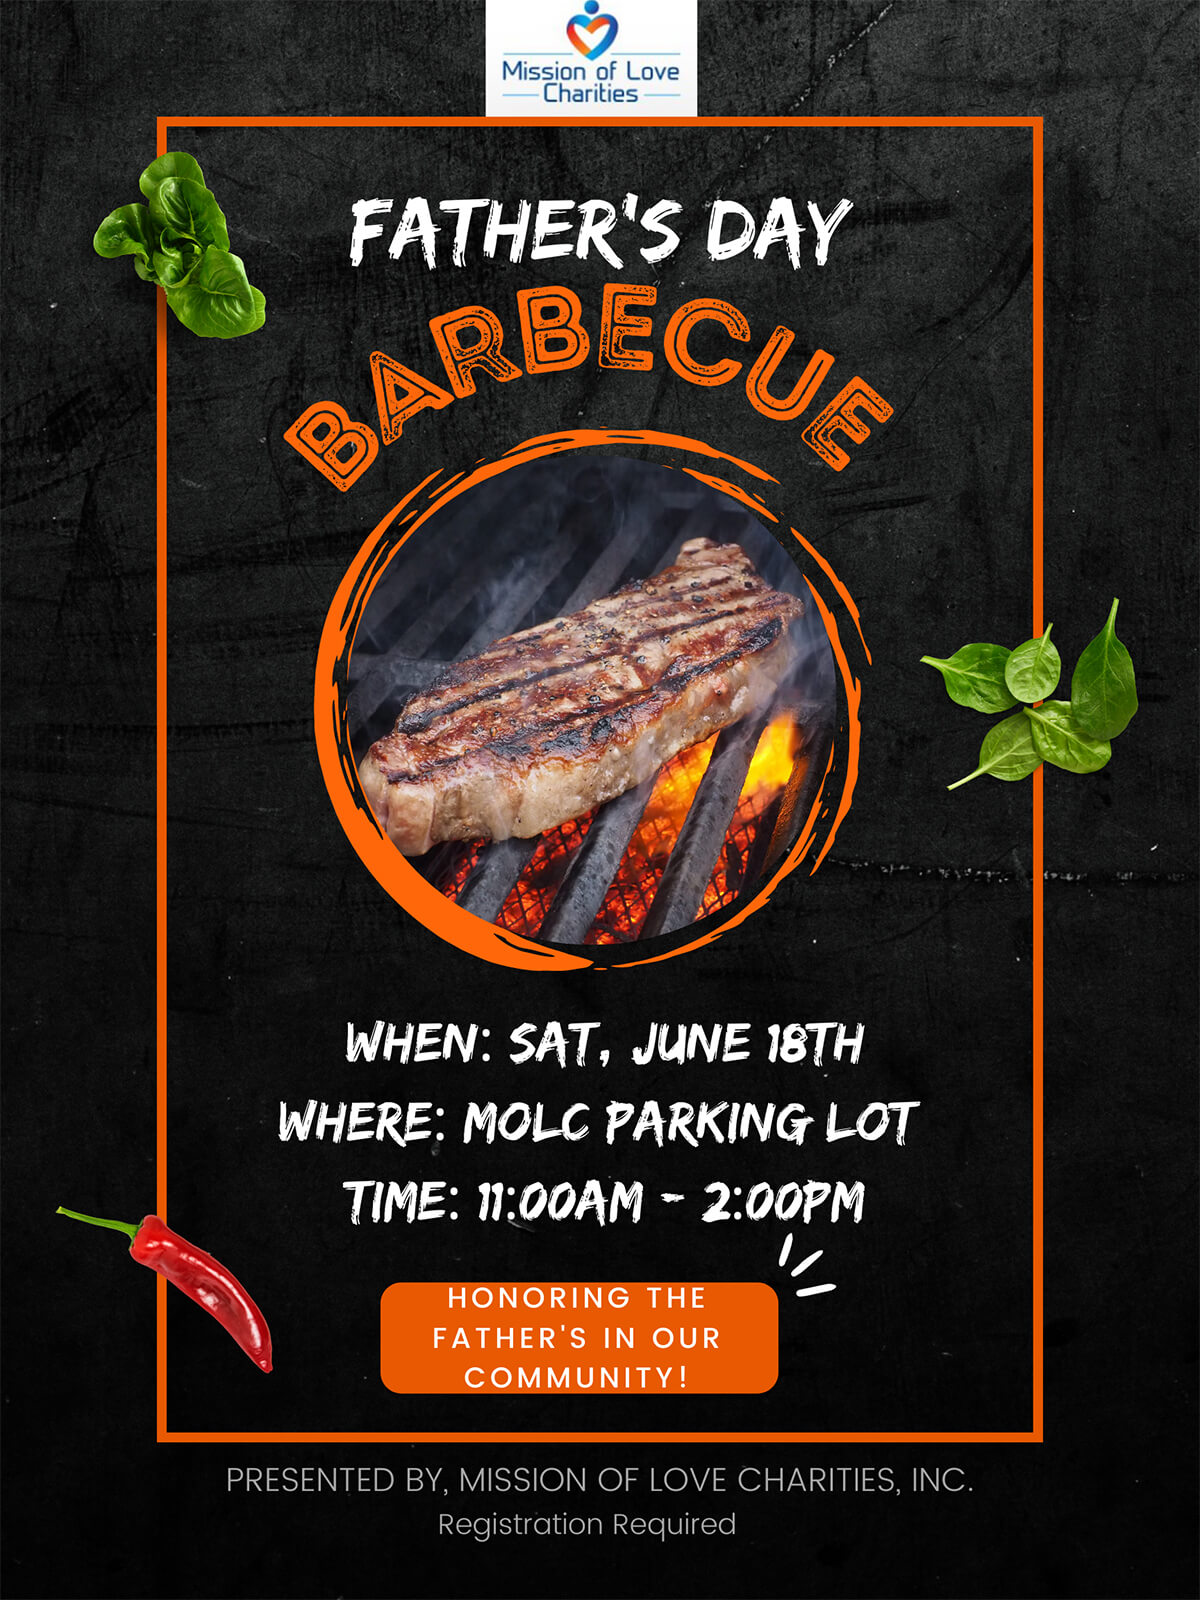 Father’s Day Barbecue